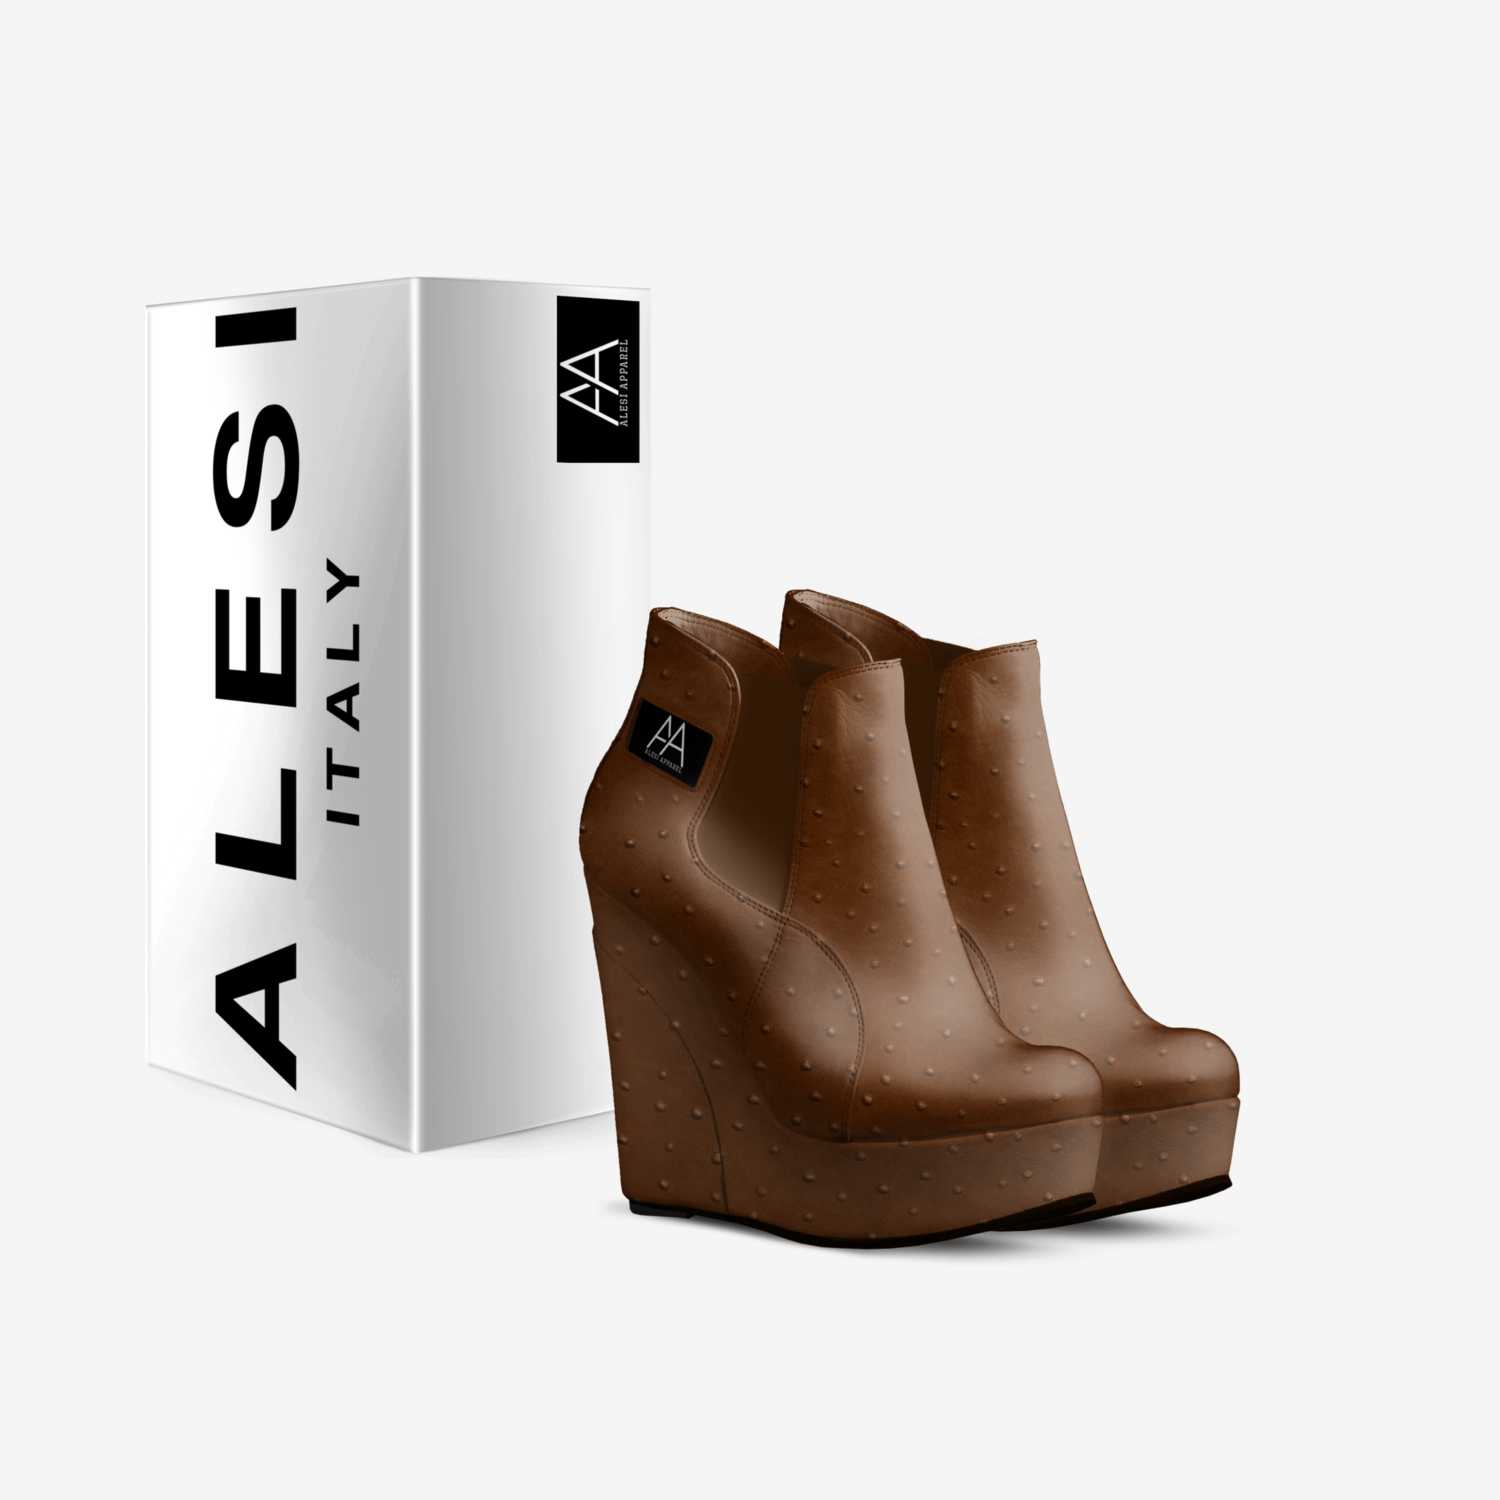 ALESI WEDGE custom made in Italy shoes by Lonanthony Parker | Box view